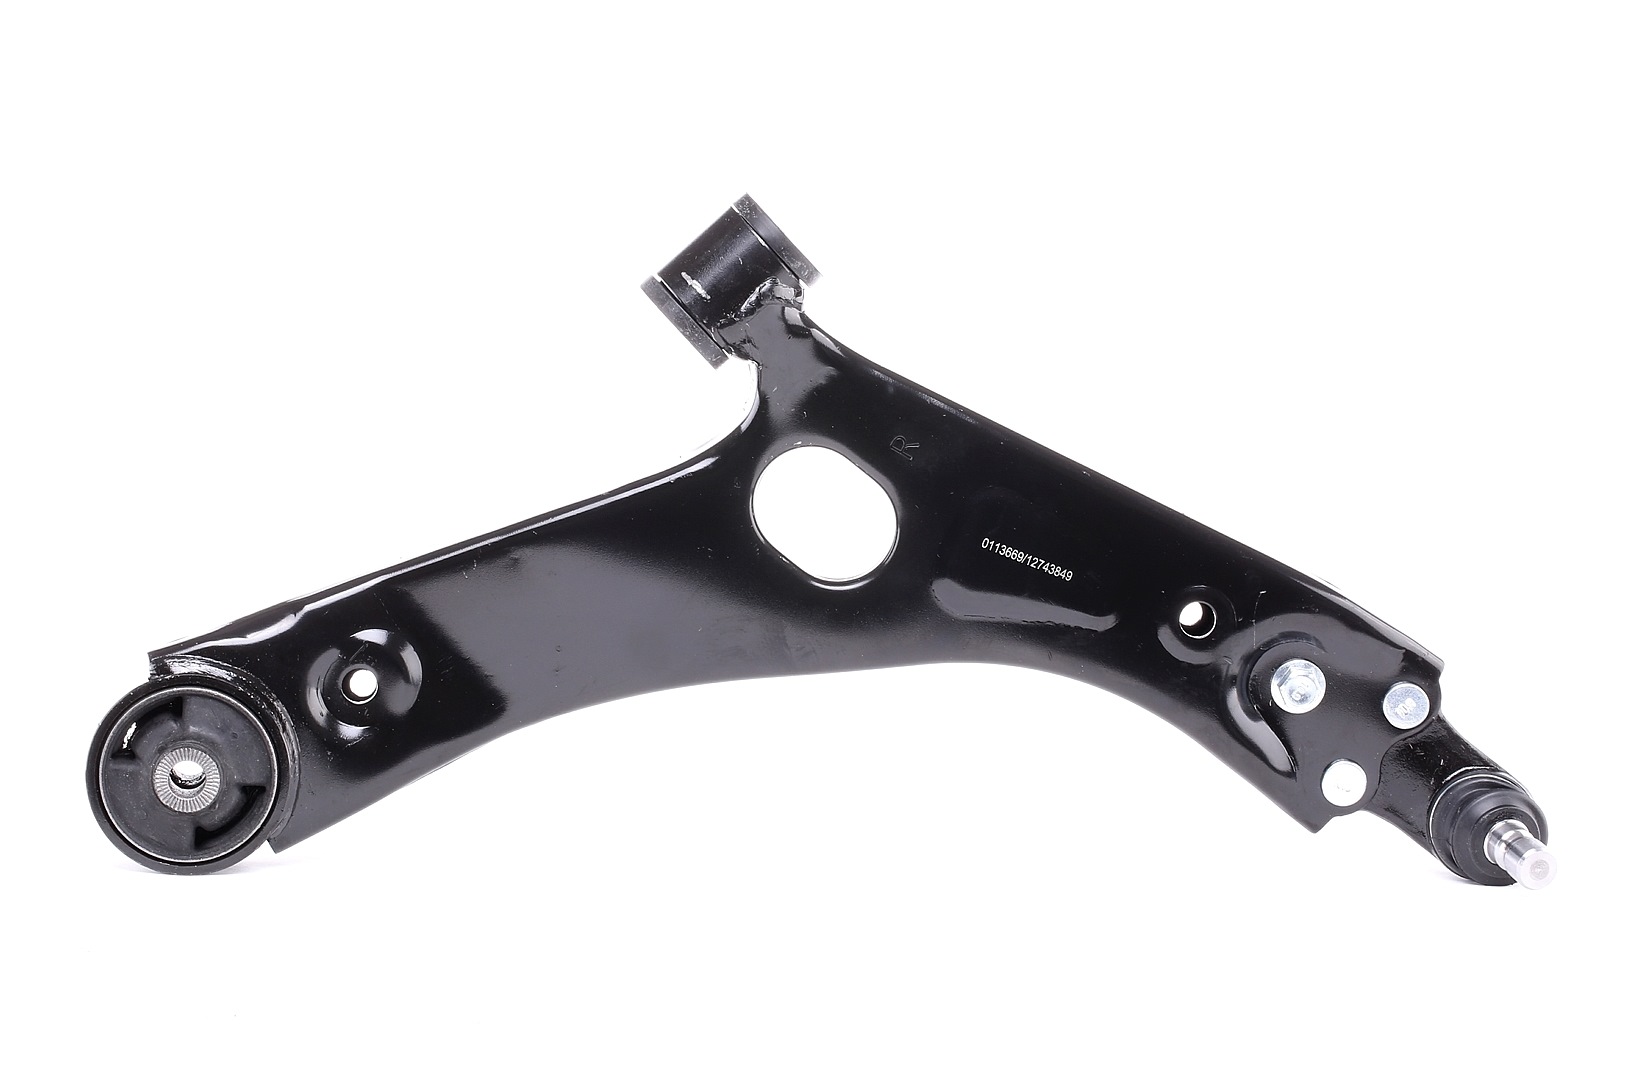 SKCA-0050995 STARK Control arm KIA with accessories, Front Axle, Lower, Right, outer, Control Arm, Sheet Steel, Cone Size: 18 mm